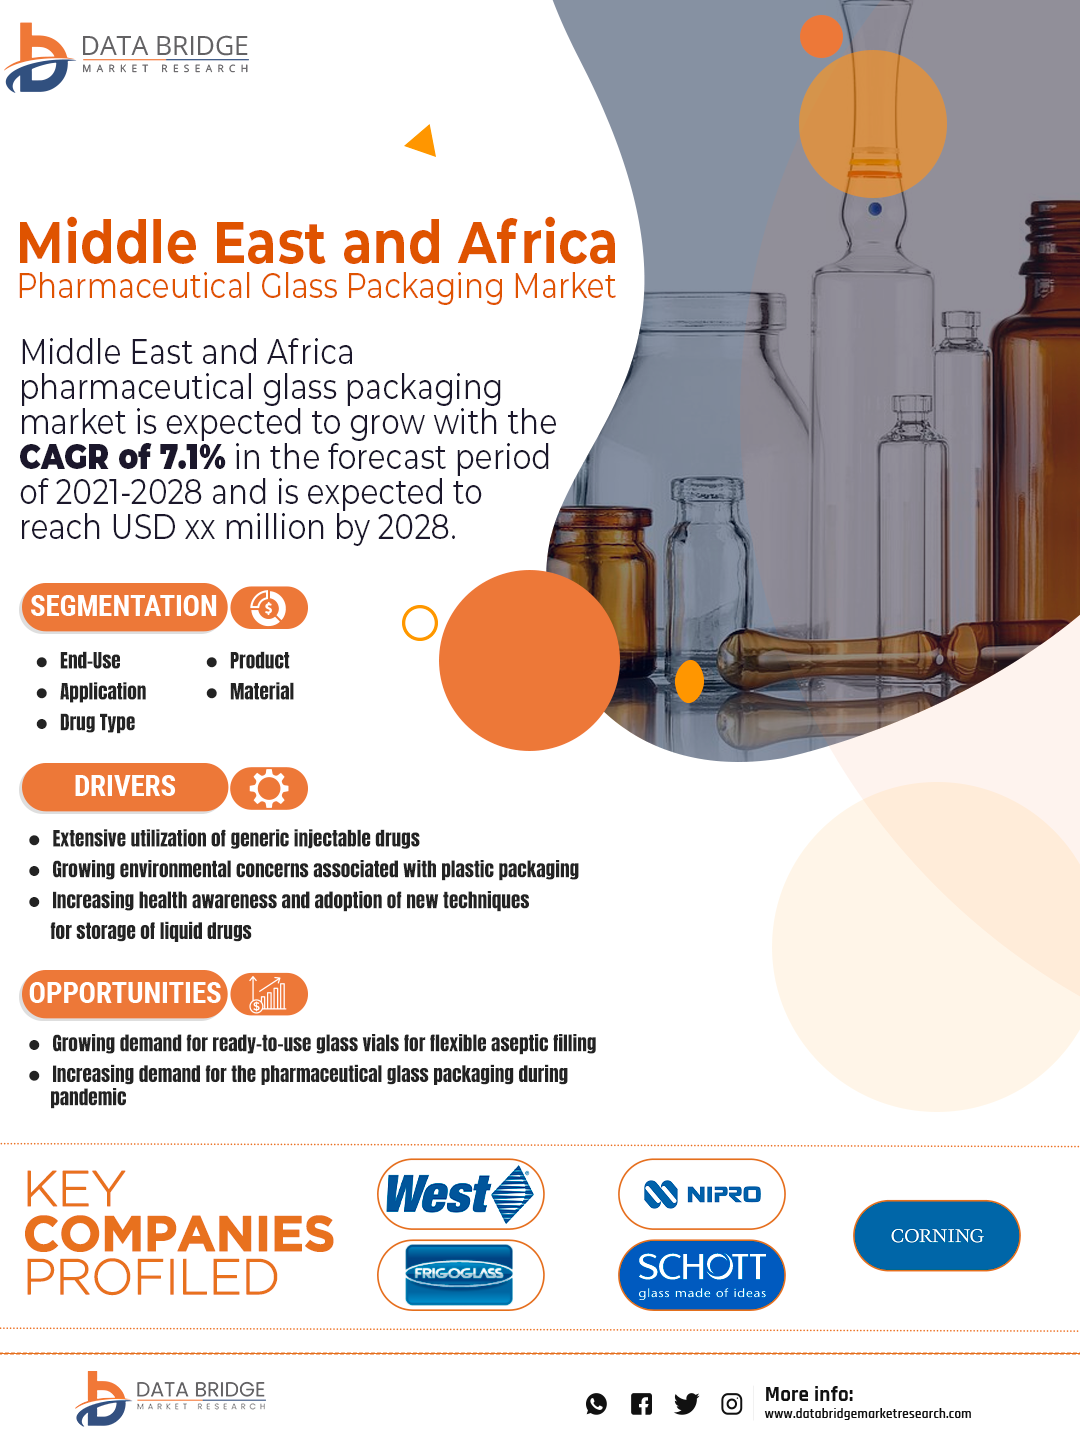 Middle East and Africa Pharmaceutical Glass Packaging Market